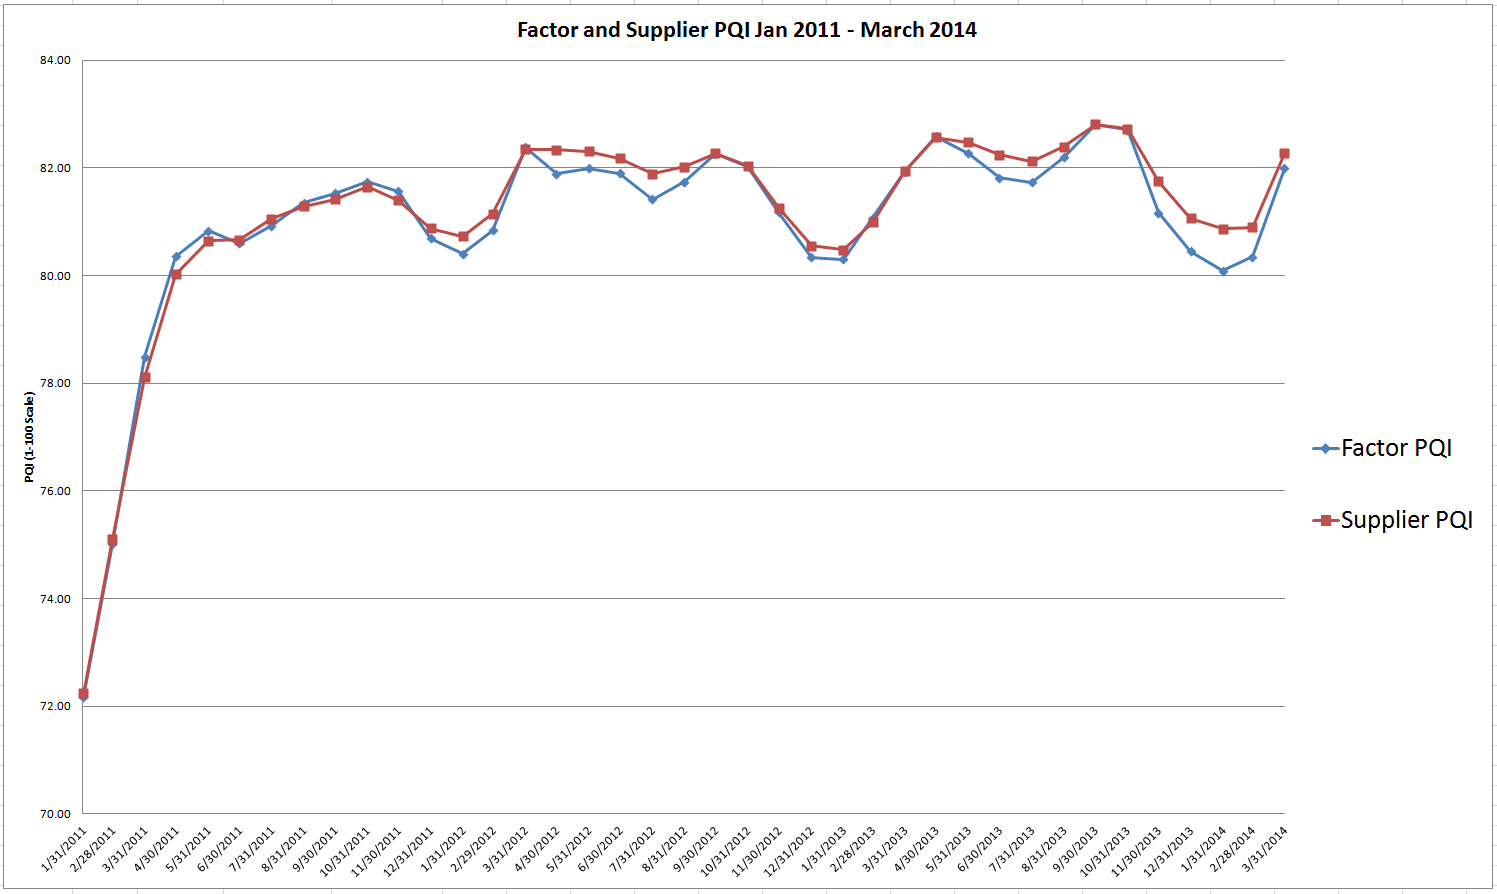 PQI Chart for Factor and Supplier Data